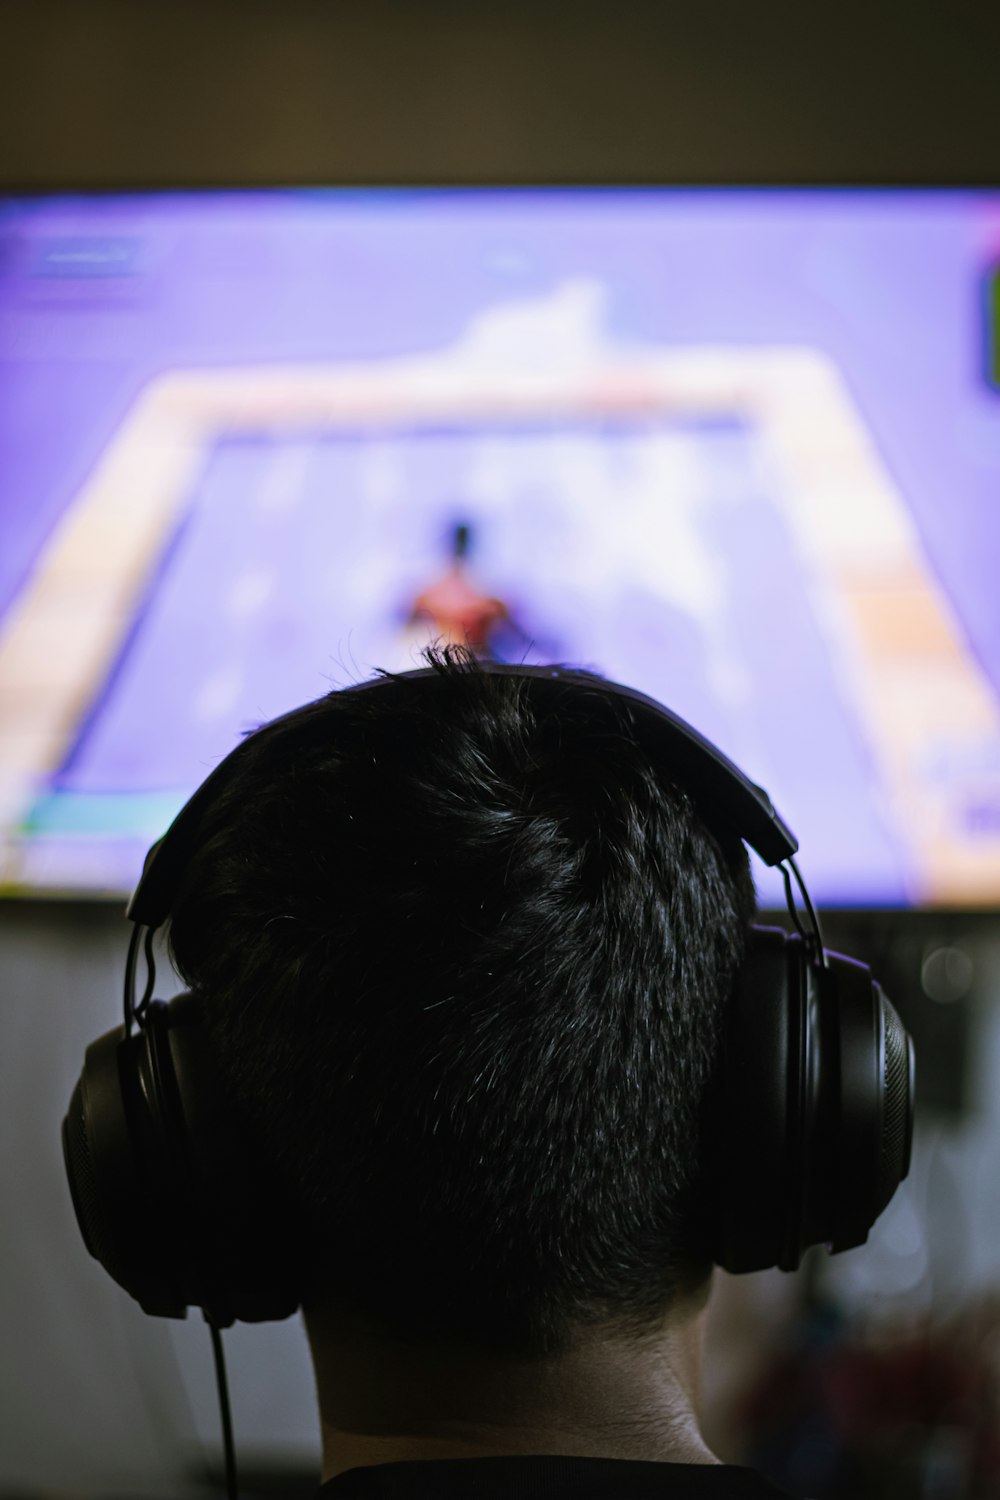 a person wearing headphones watching a television